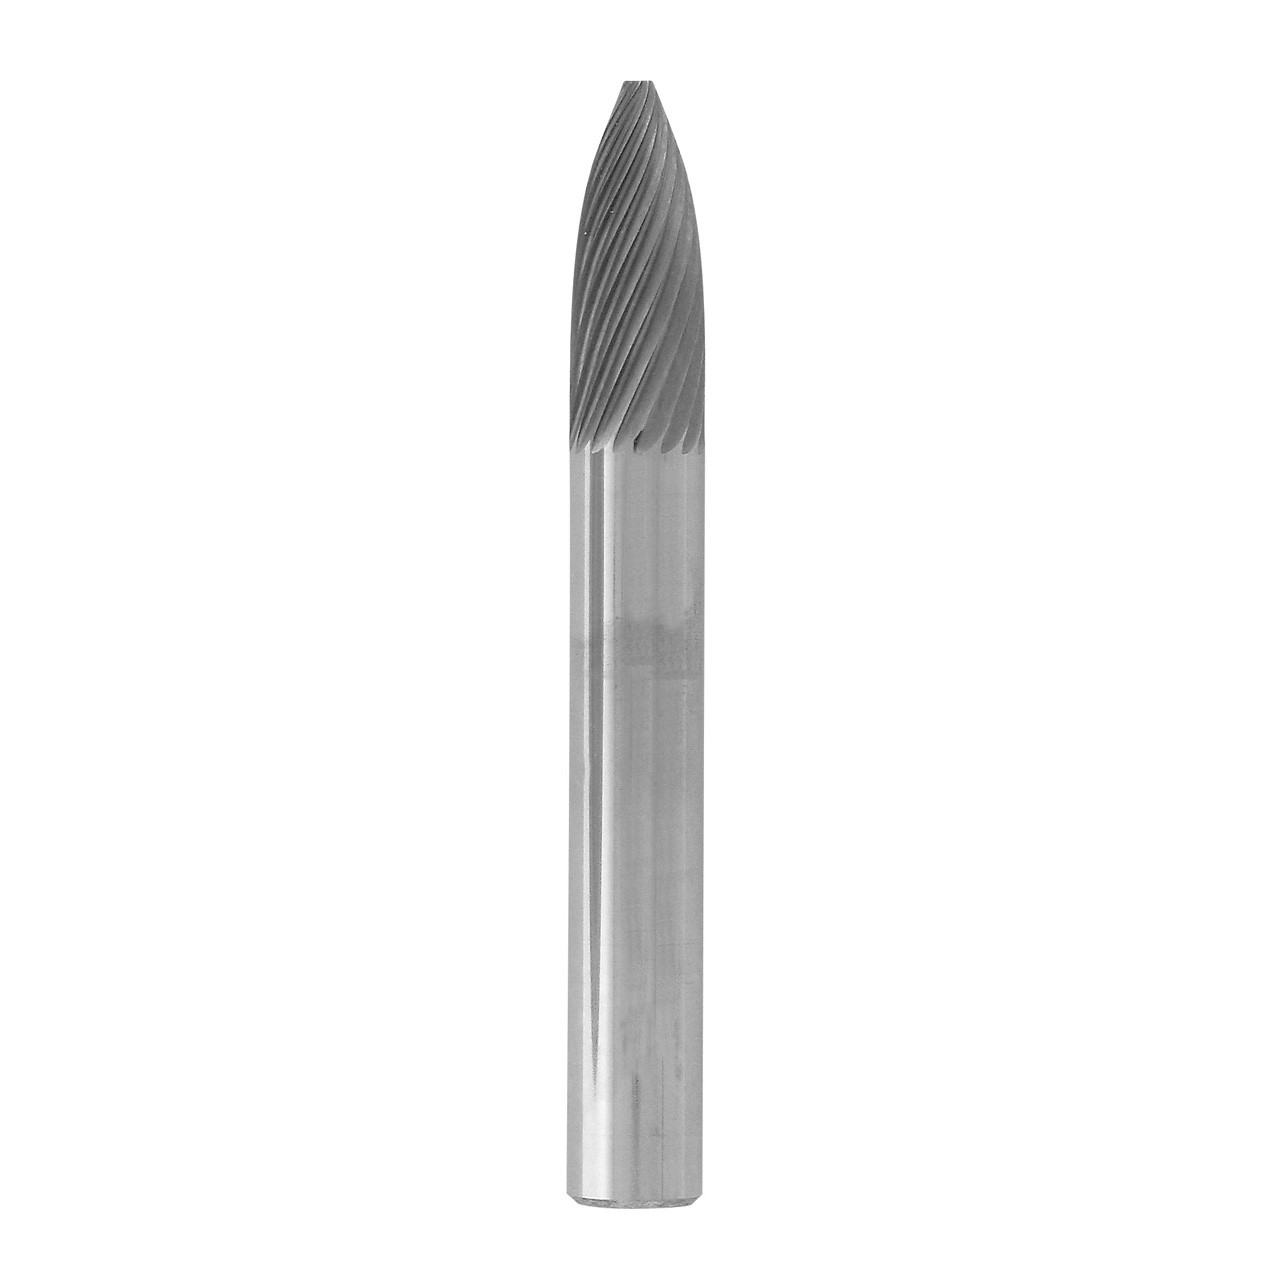 2" Solid Carbide Burs - 1/4" Shank, 1/4" x 5/8" Tapered Flat End